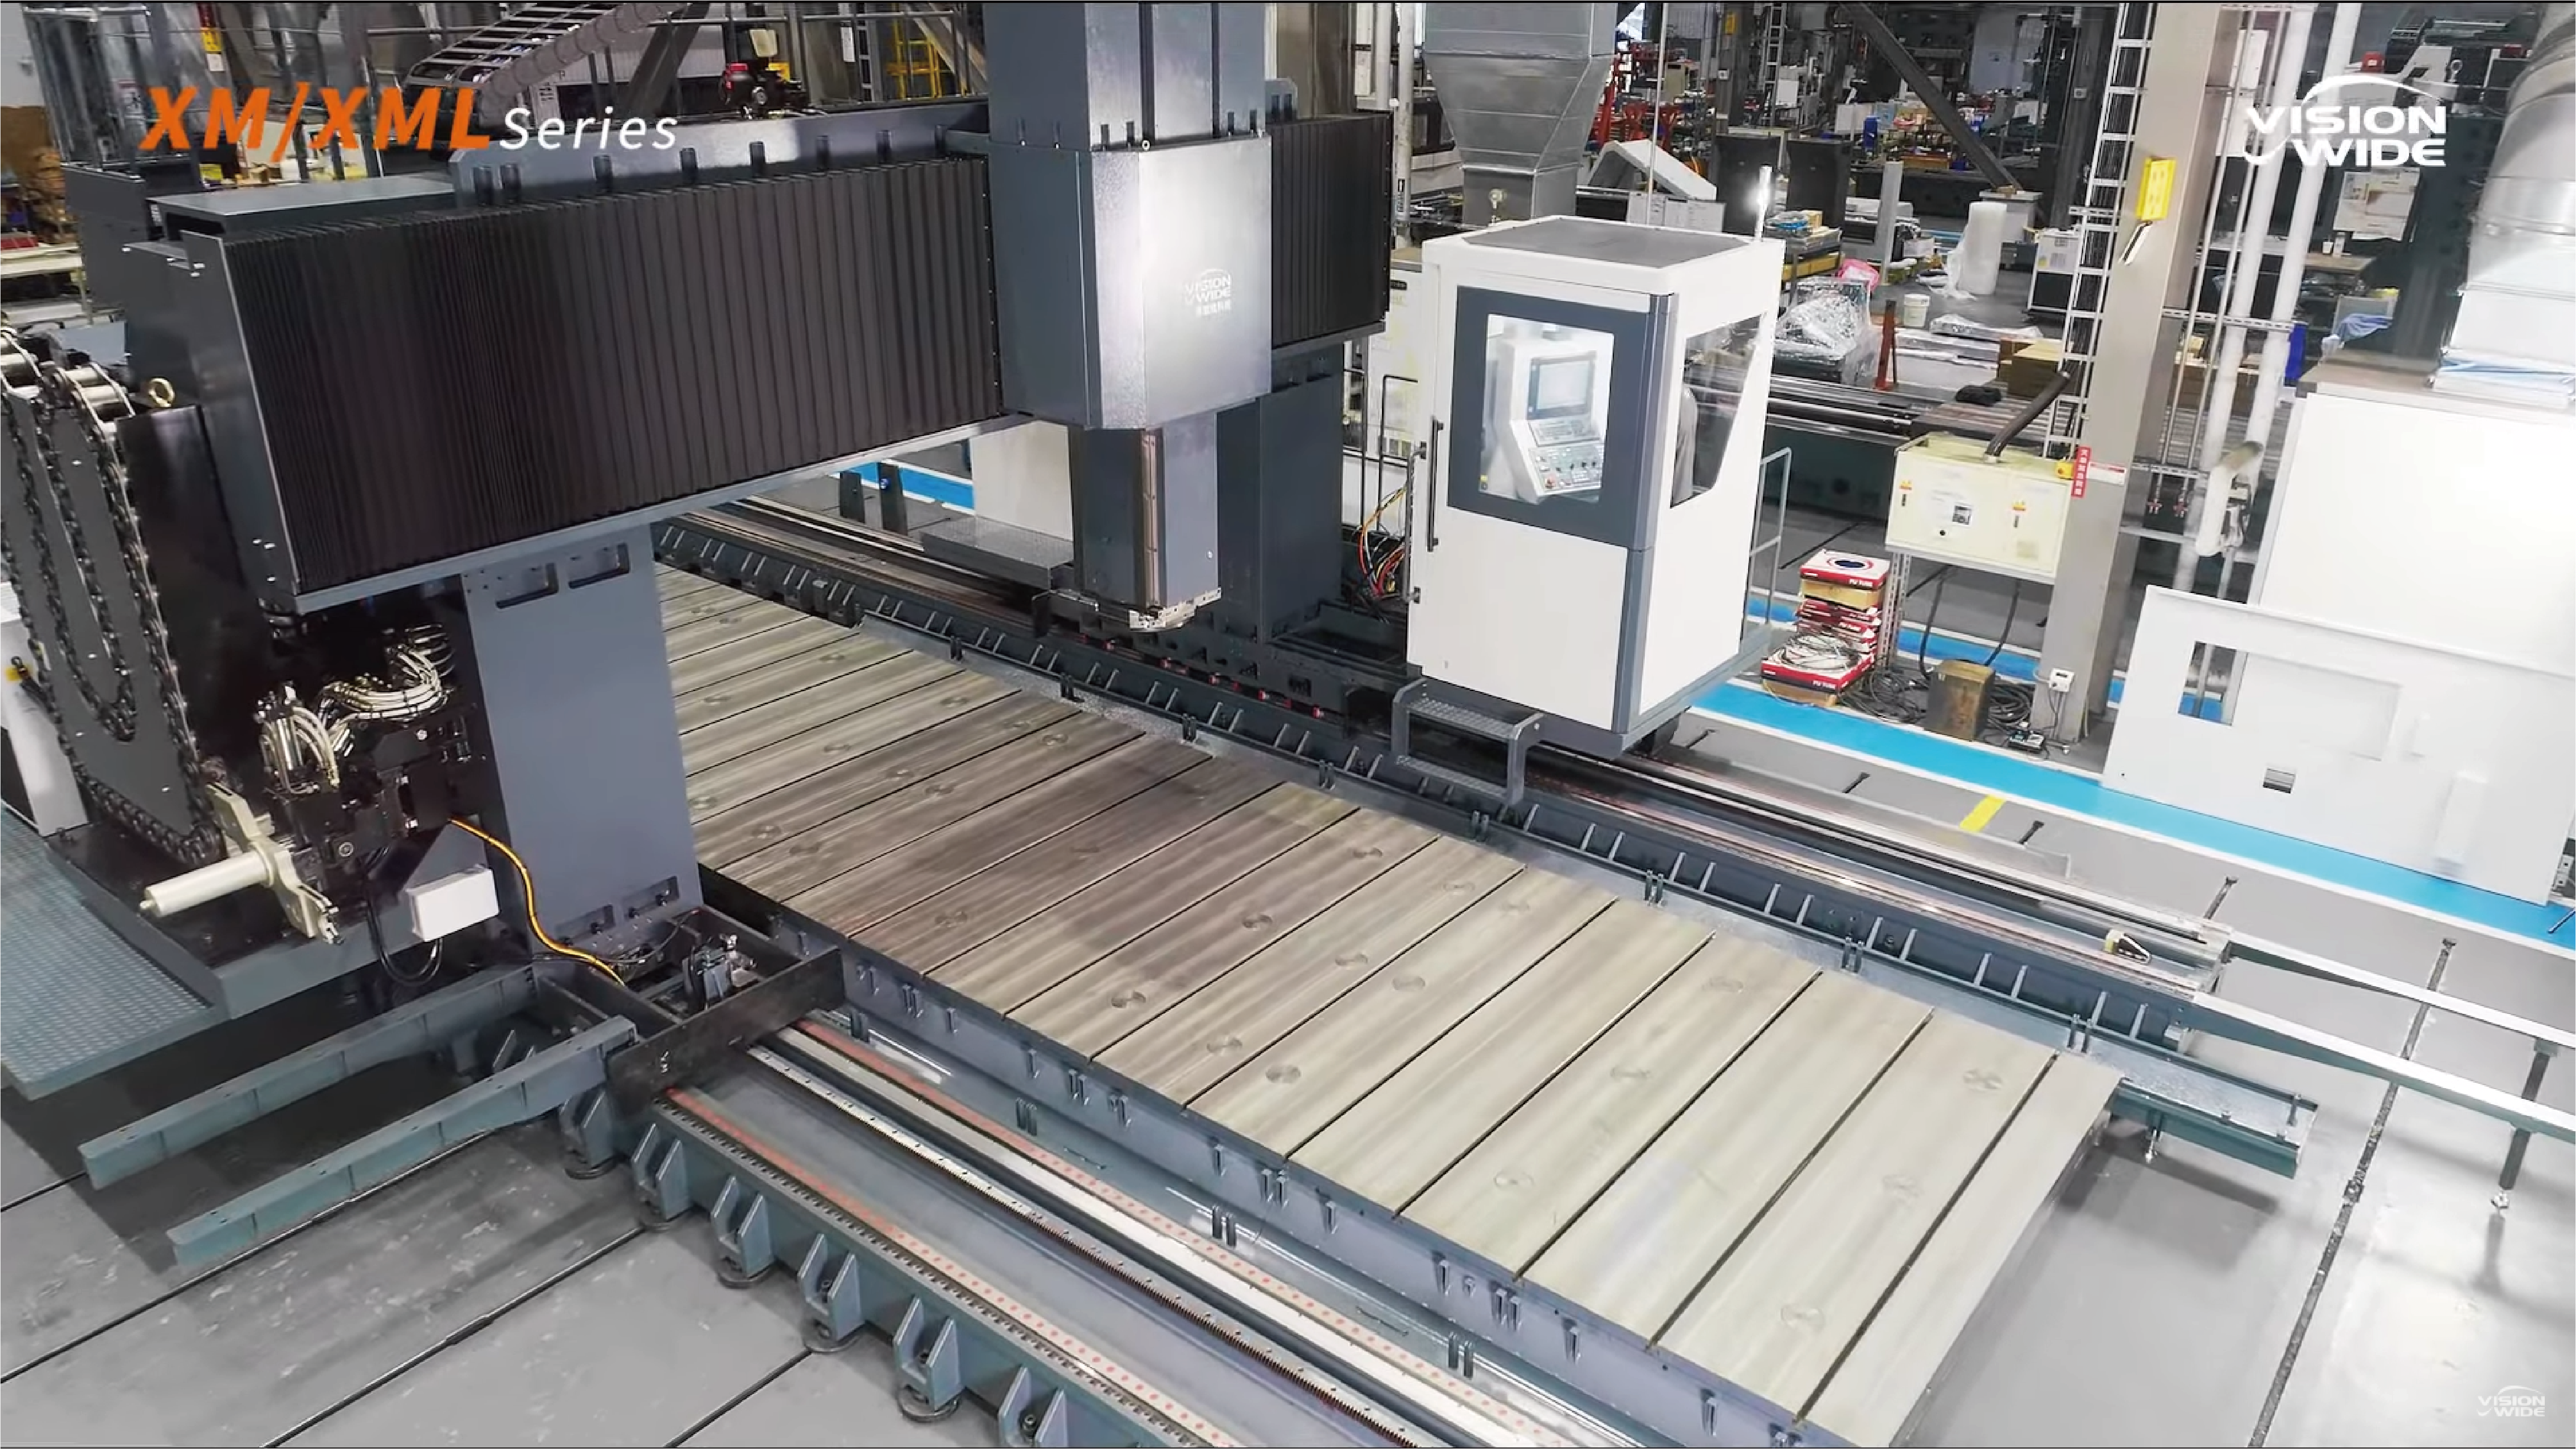 XM/XML Series-Extremely Might Machining Center